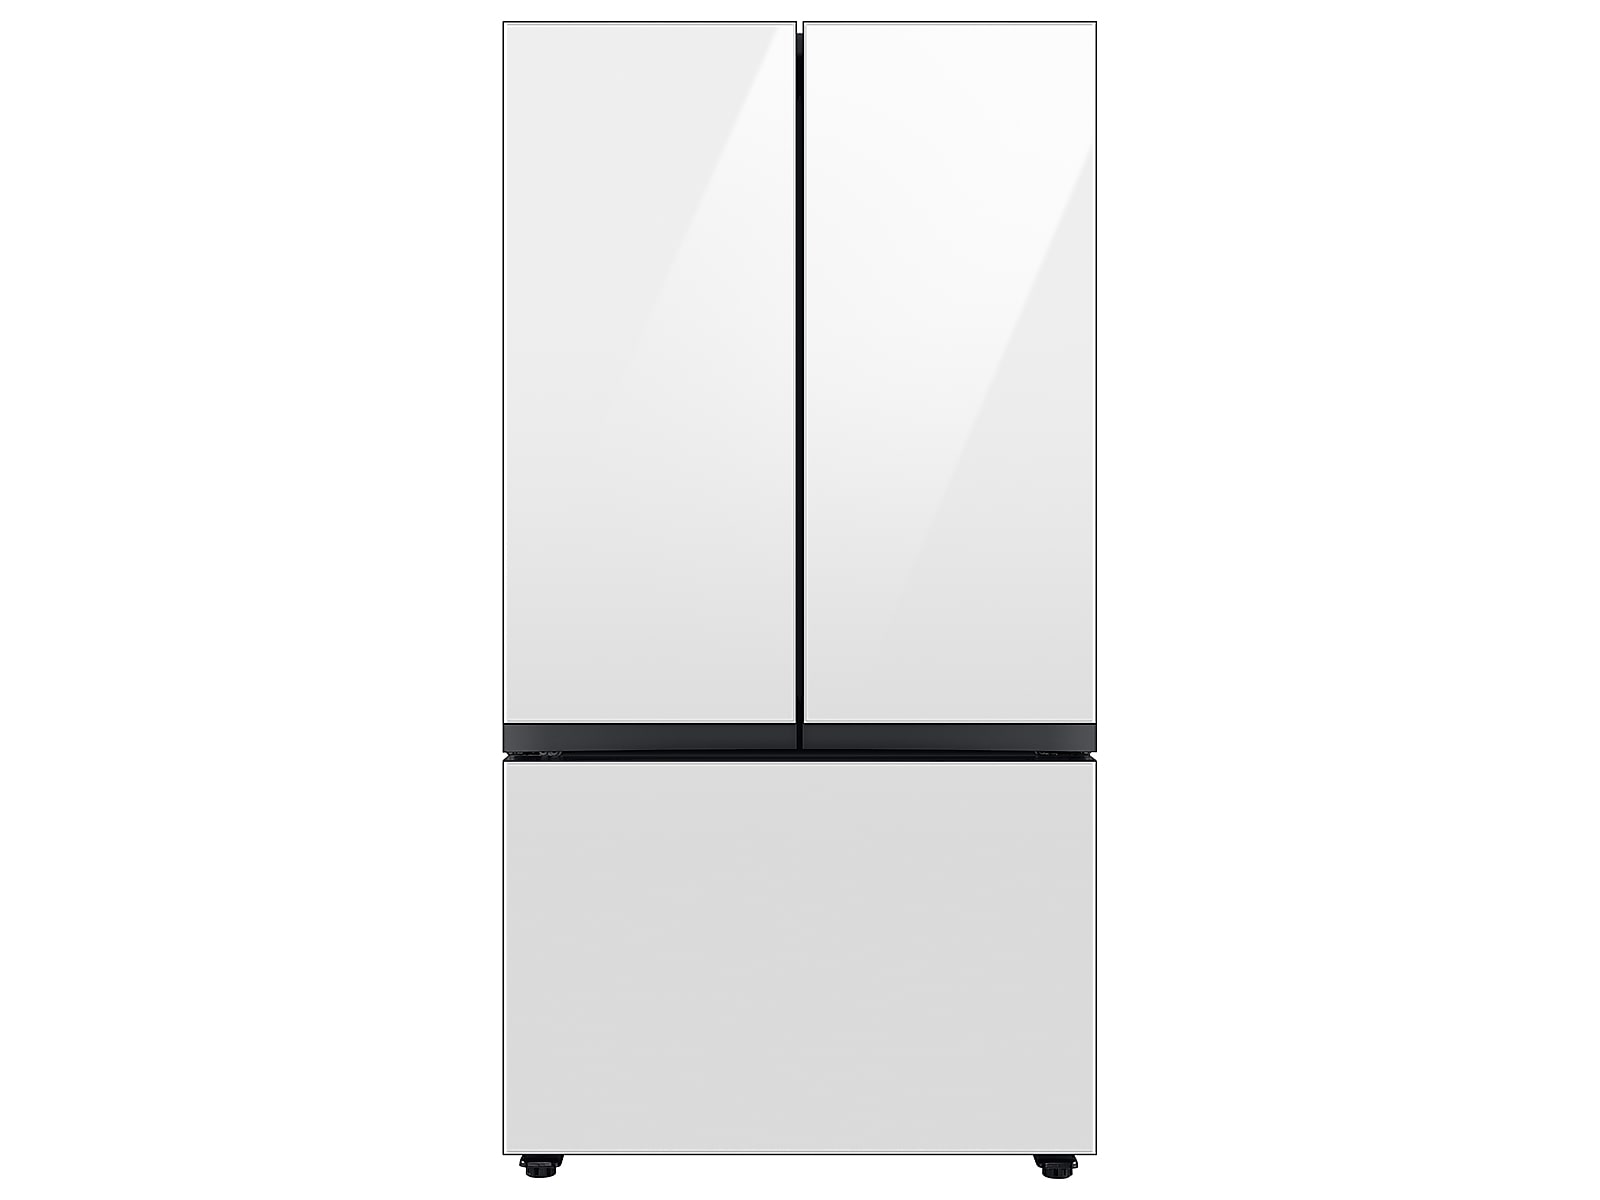 Samsung Bespoke 3-Door French Door Refrigerator (30 cu. ft.) with AutoFill Water Pitcher in White Glass(RF30BB620012AA)